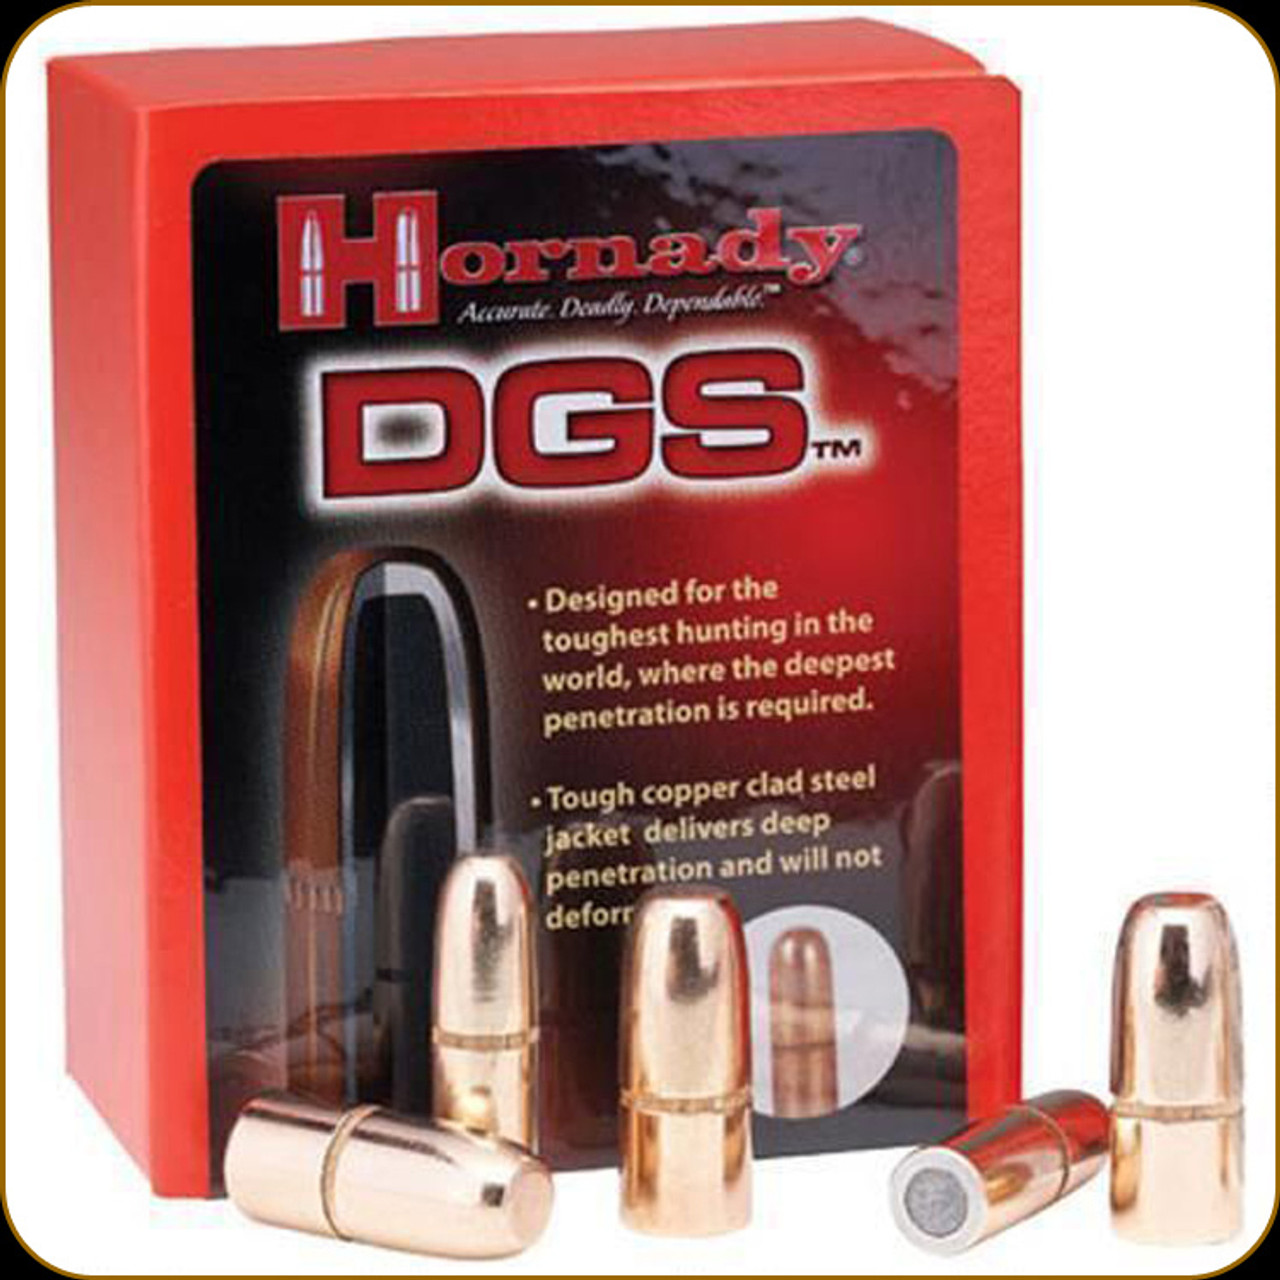 The Hornady® DGS® bullets feature an advanced profile built of the toughest materials that penetrate through thick hide, dense muscle and hard bone — delivering maximum stopping power.

The business end of the DGS® bullet features a wide, flat nose that delivers maximum energy upon impact, while resisting bullet deformation and deflection. Incorporating a very hard high antimony lead core with a copper-clad steel jacket, this bullet maintains integrity and overall weight retention when driving through even the toughest hide and bone. Uniform in shape and size to the DGX® (Dangerous Game™ eXpanding) bullet, you can reliably and accurately shoot both from the same firearm with little to no shift in point of aim or impact.